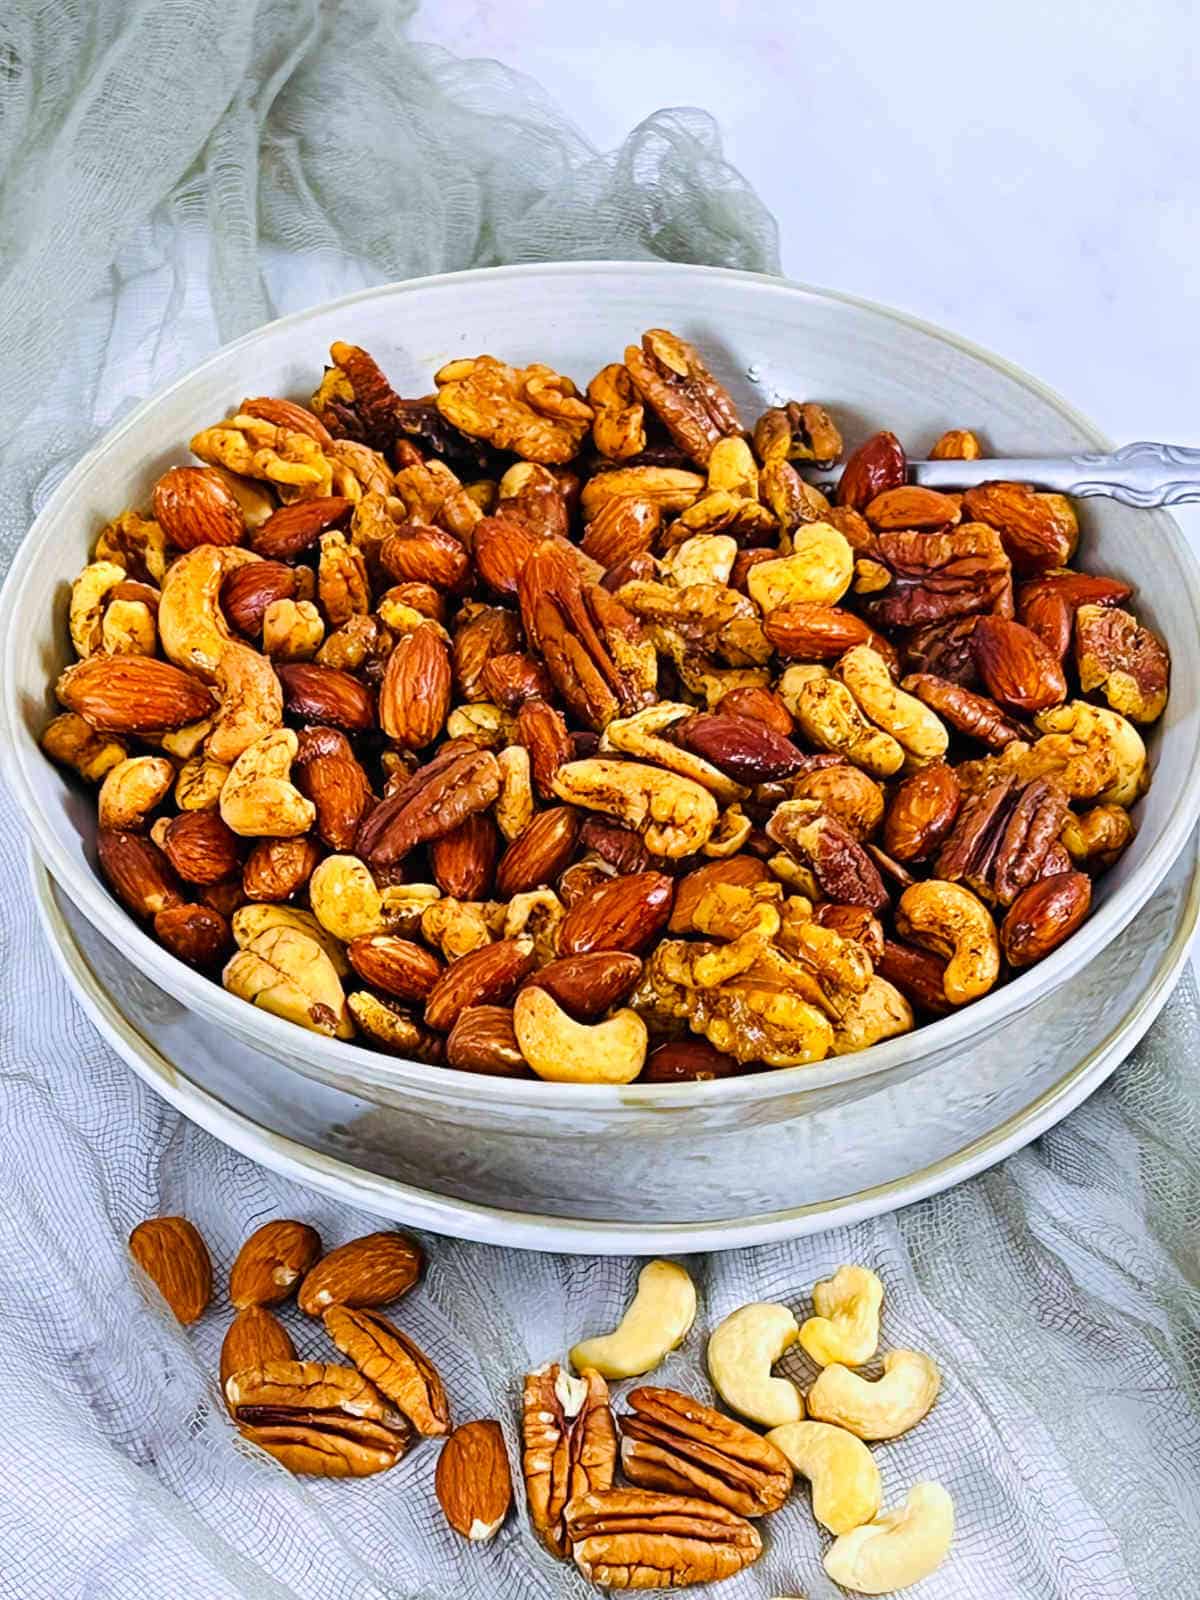 Roasted nuts in a brown bowl.